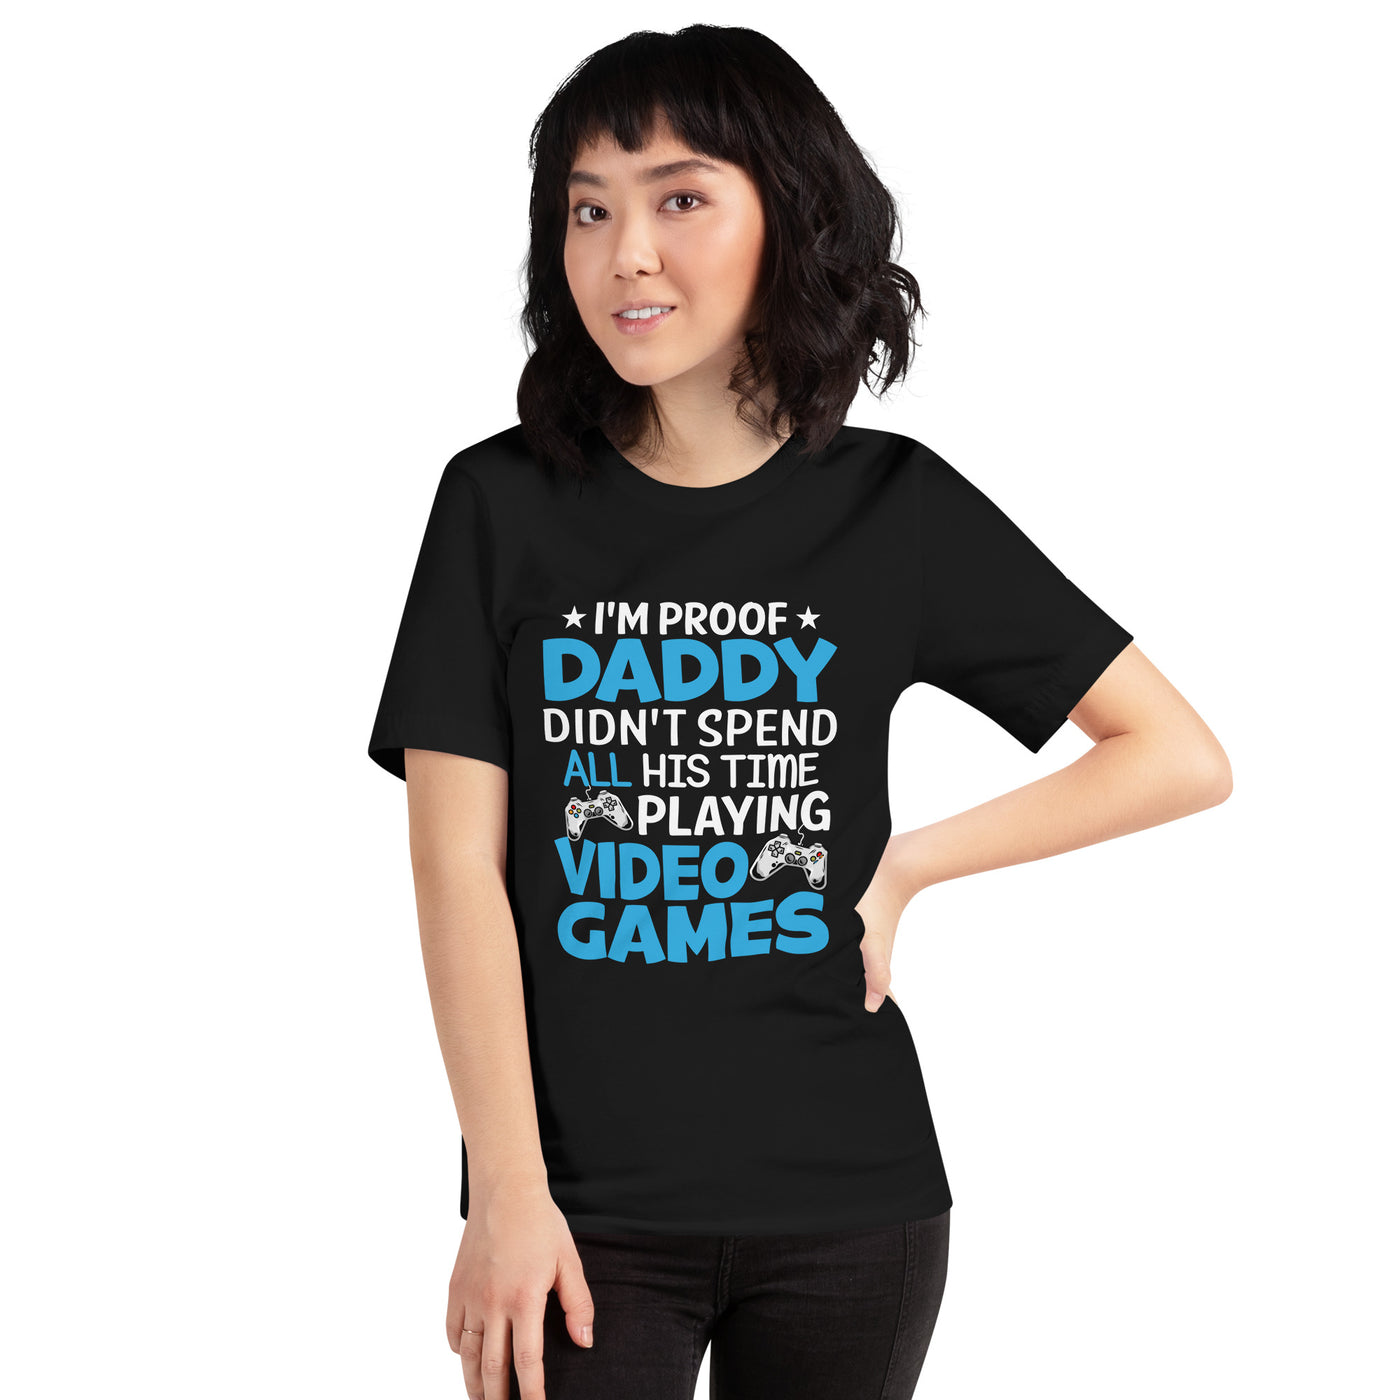 I am Proof * Daddy didn't spend his time playing Video Games* - Unisex t-shirt